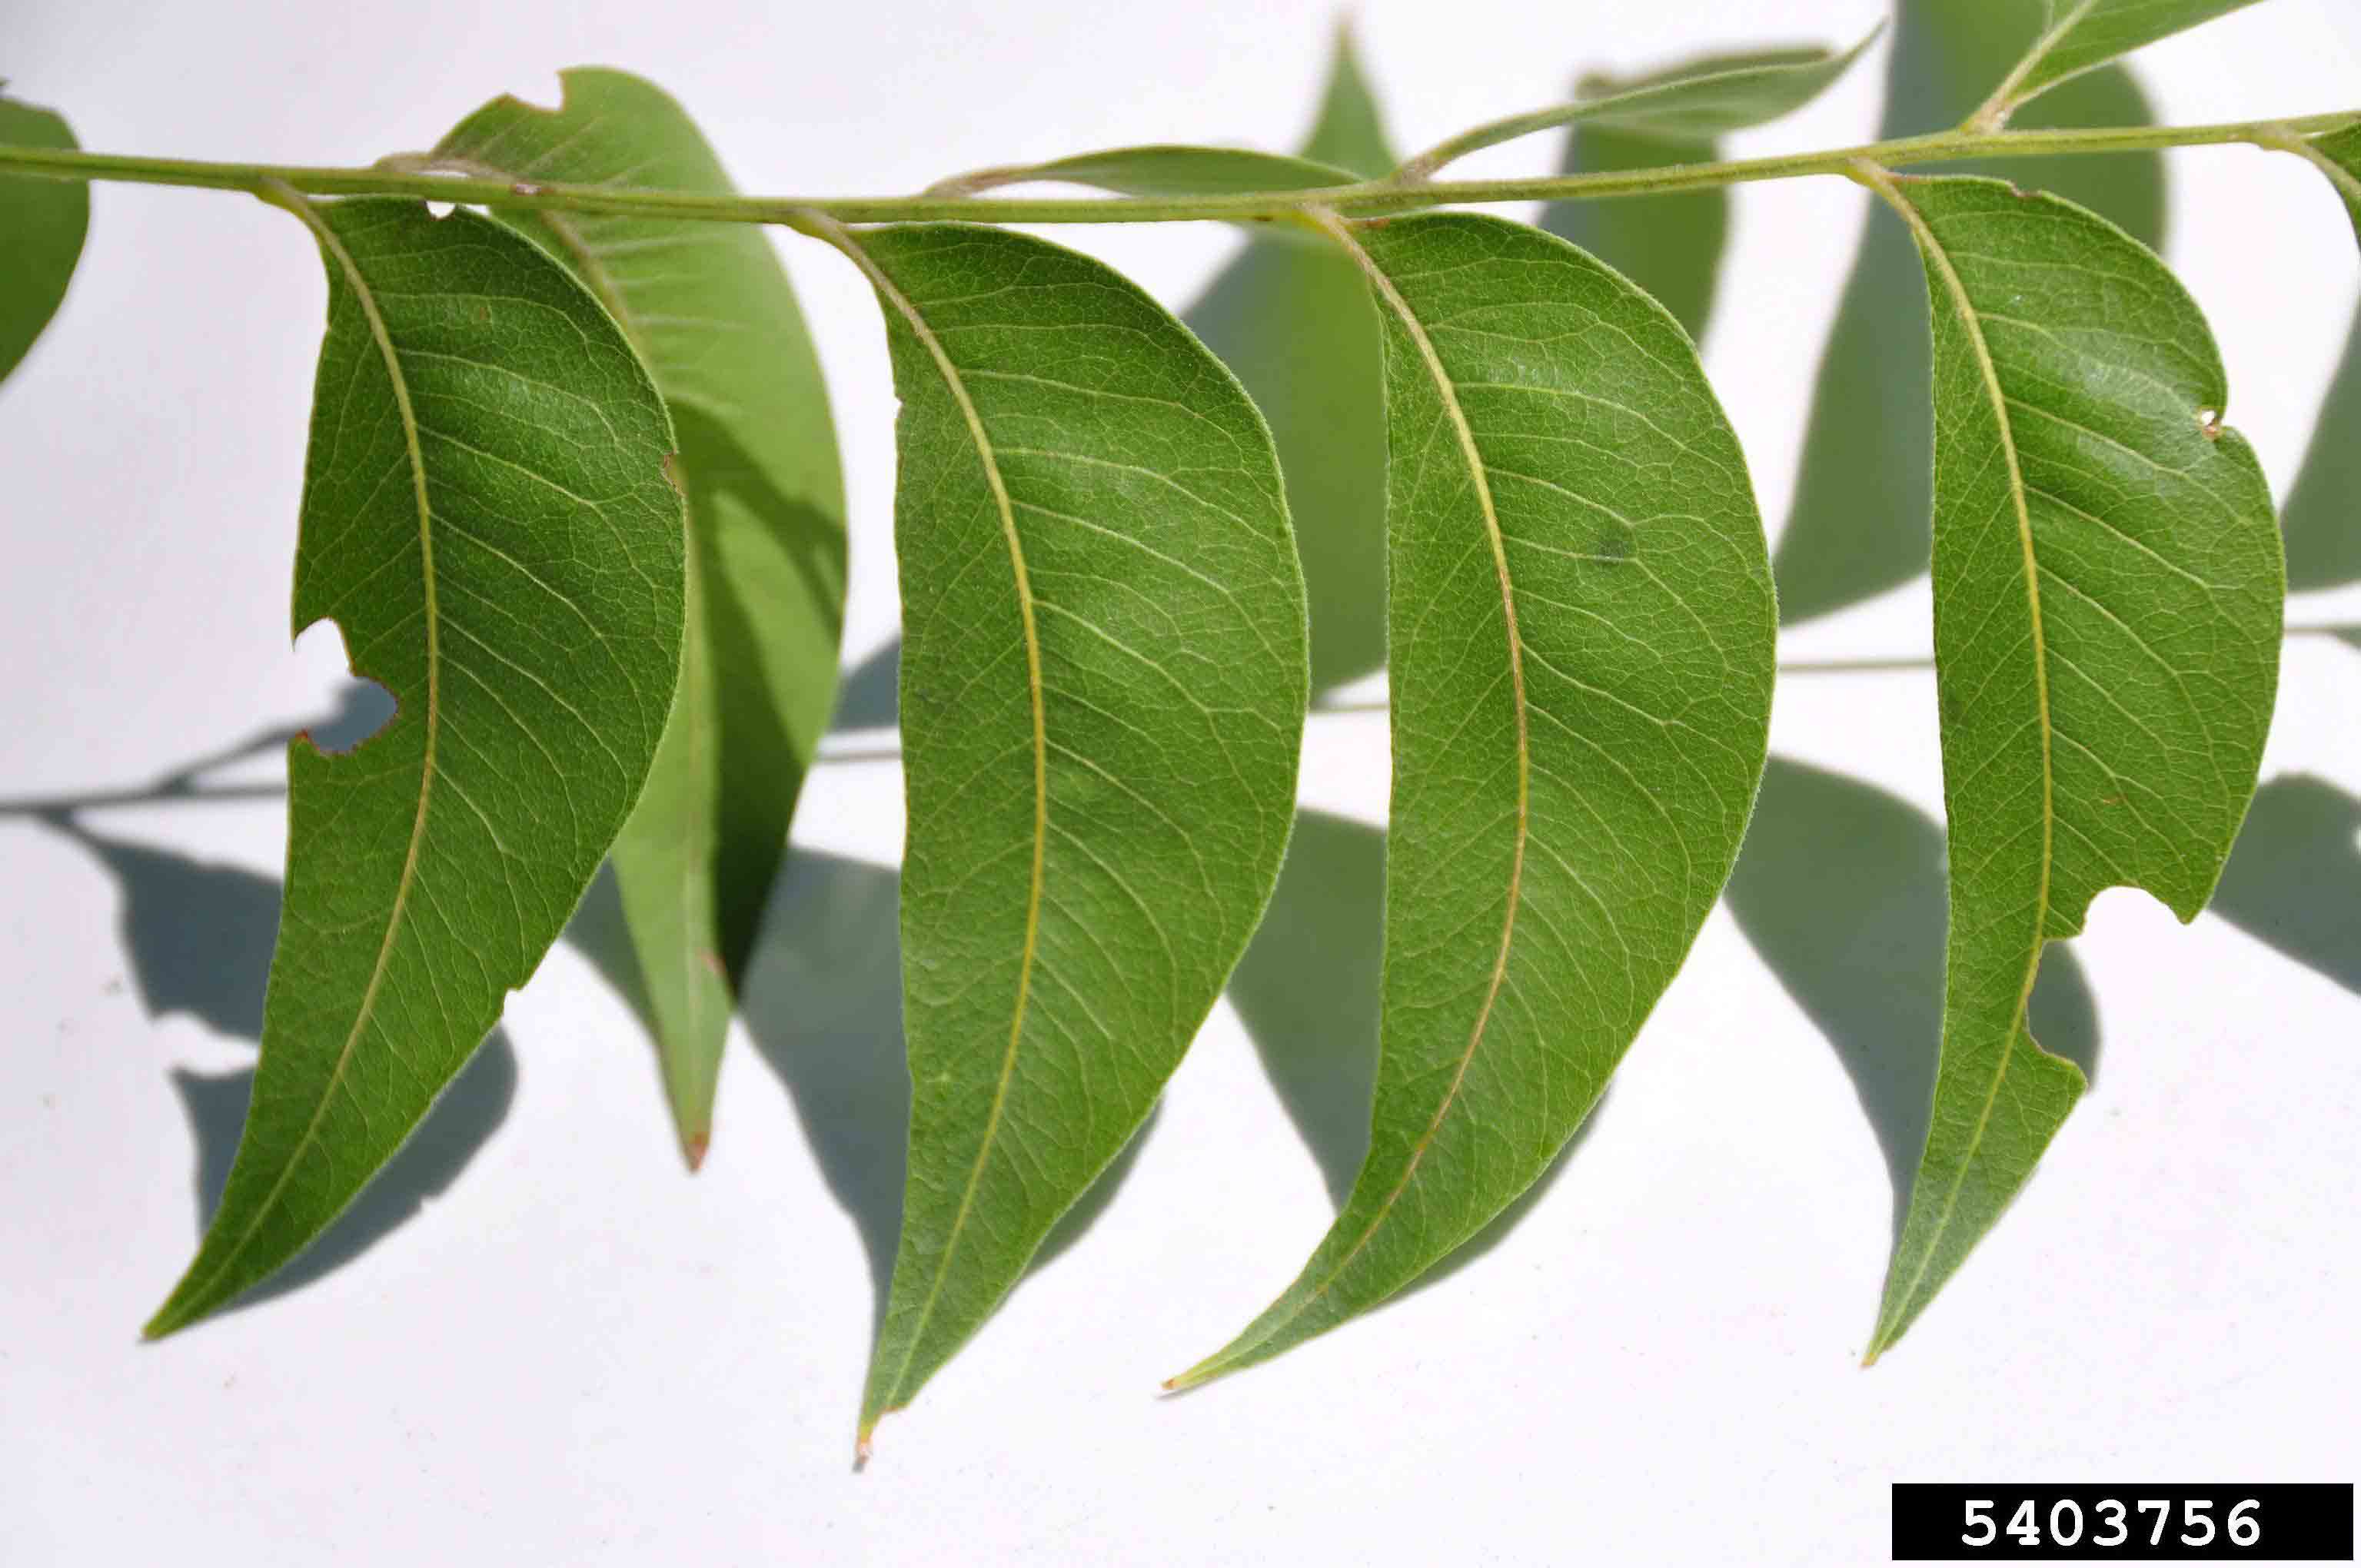 Soapberry leaf, pinnately compound, with leaflets slightly curved